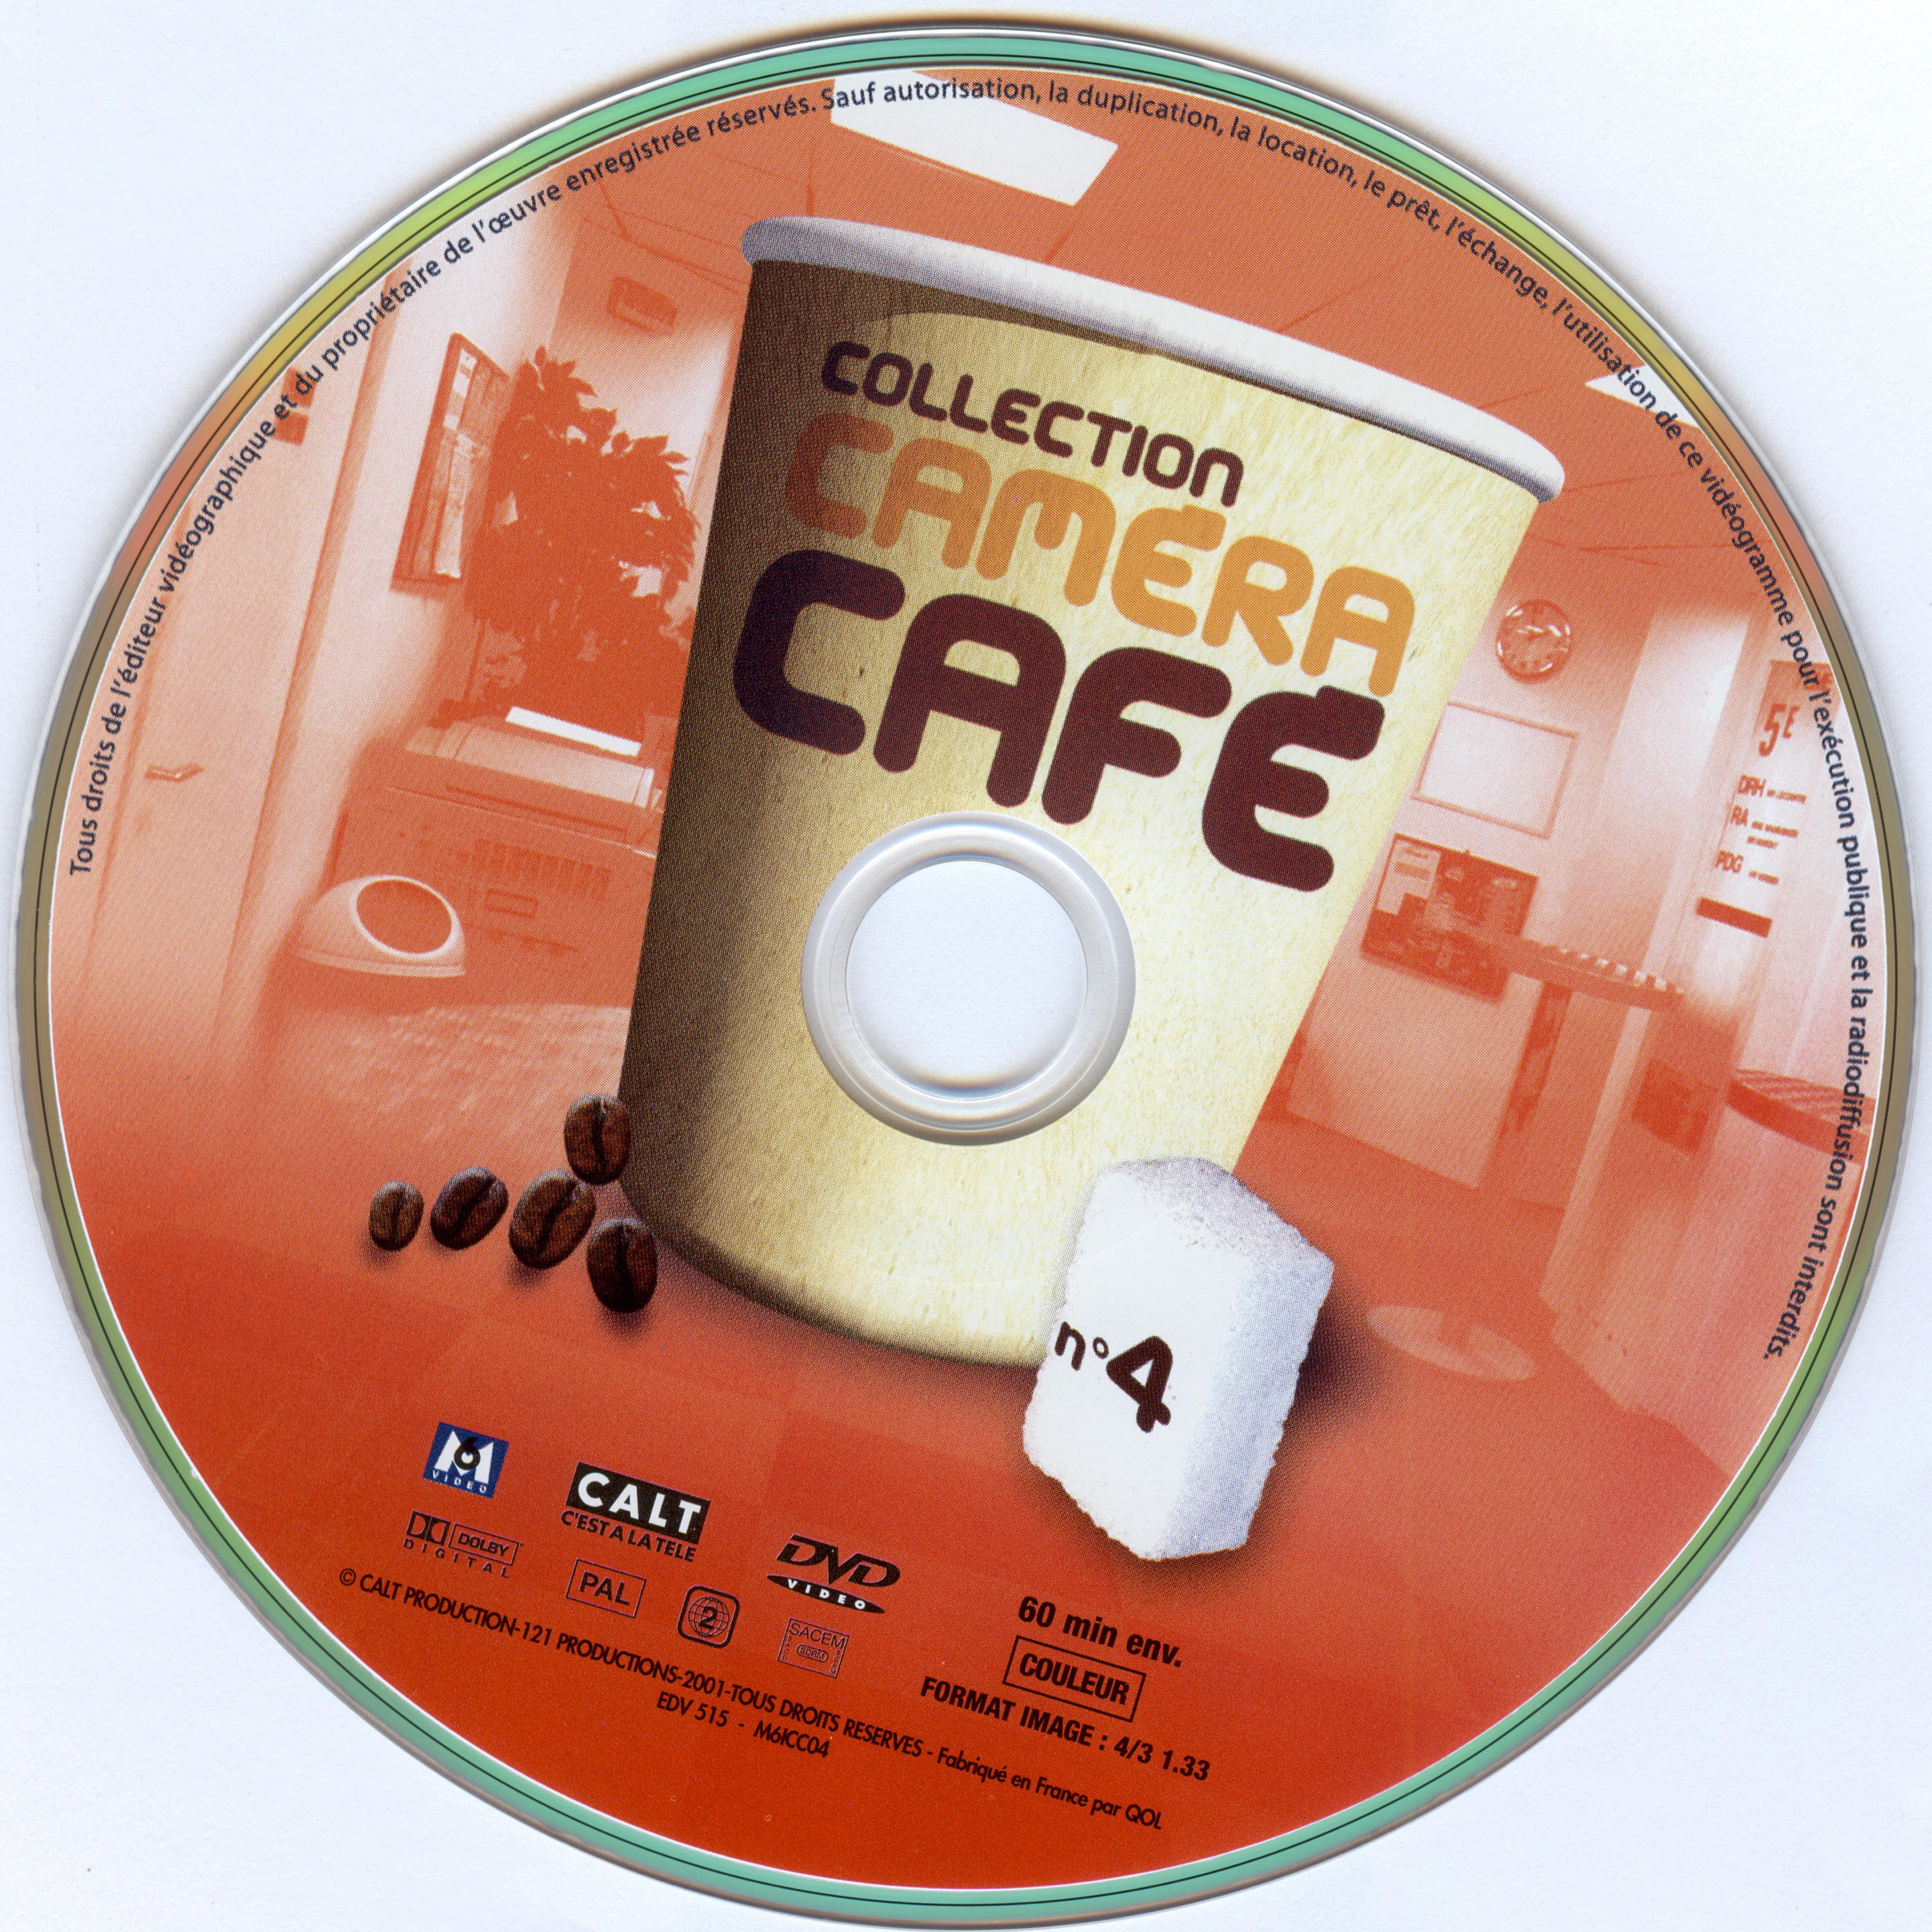 Collection Camera Cafe vol 04